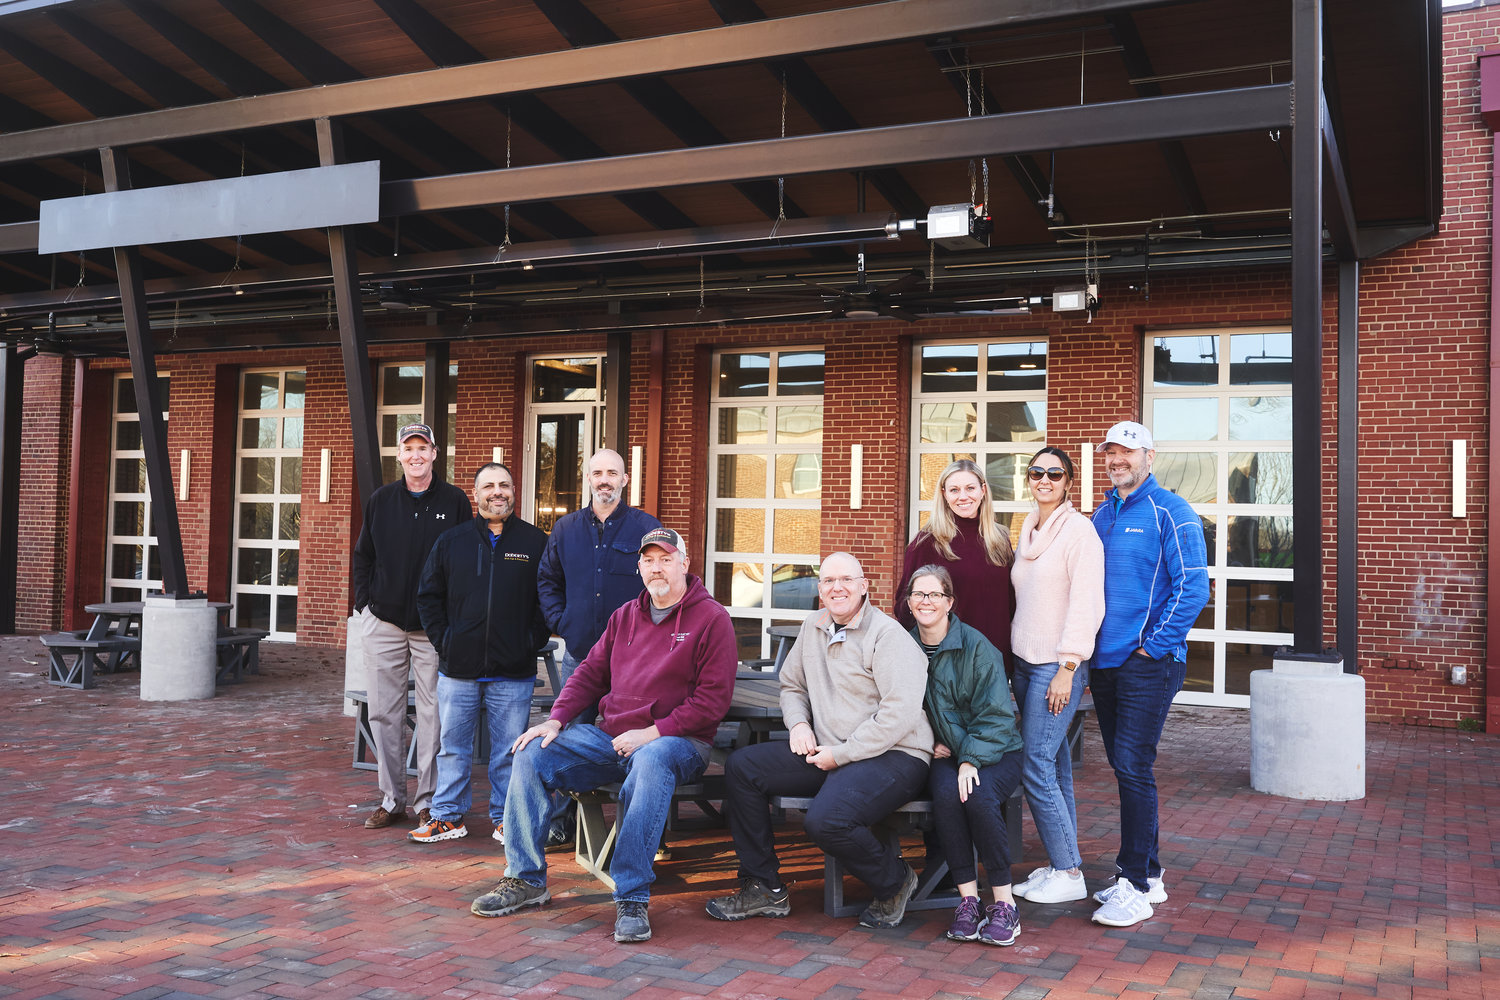 SoCo Pittsboro will be the home of Havoc Brewing Company and Doherty's Irish Pub and Restaurant. Pictured above, from left to right: Donavon Favre, Sami Taweel, Greg Peacock, Greg Stafford, Michael Pipkin, Molly Pipkin, Holly Benton, Dianne Chatterton and Scott Chatterton.